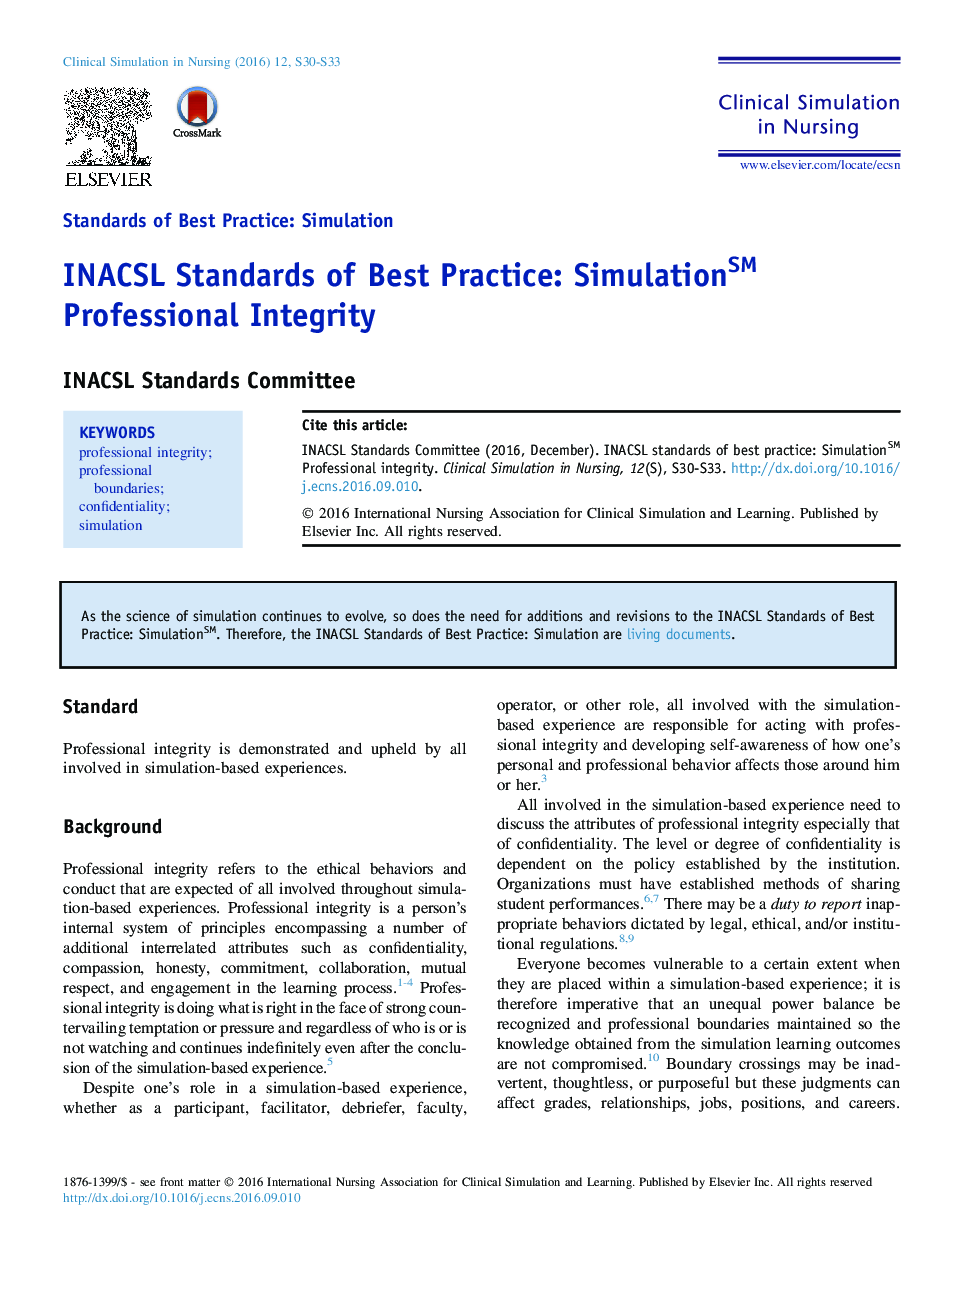 INACSL Standards of Best Practice: SimulationSM Professional Integrity